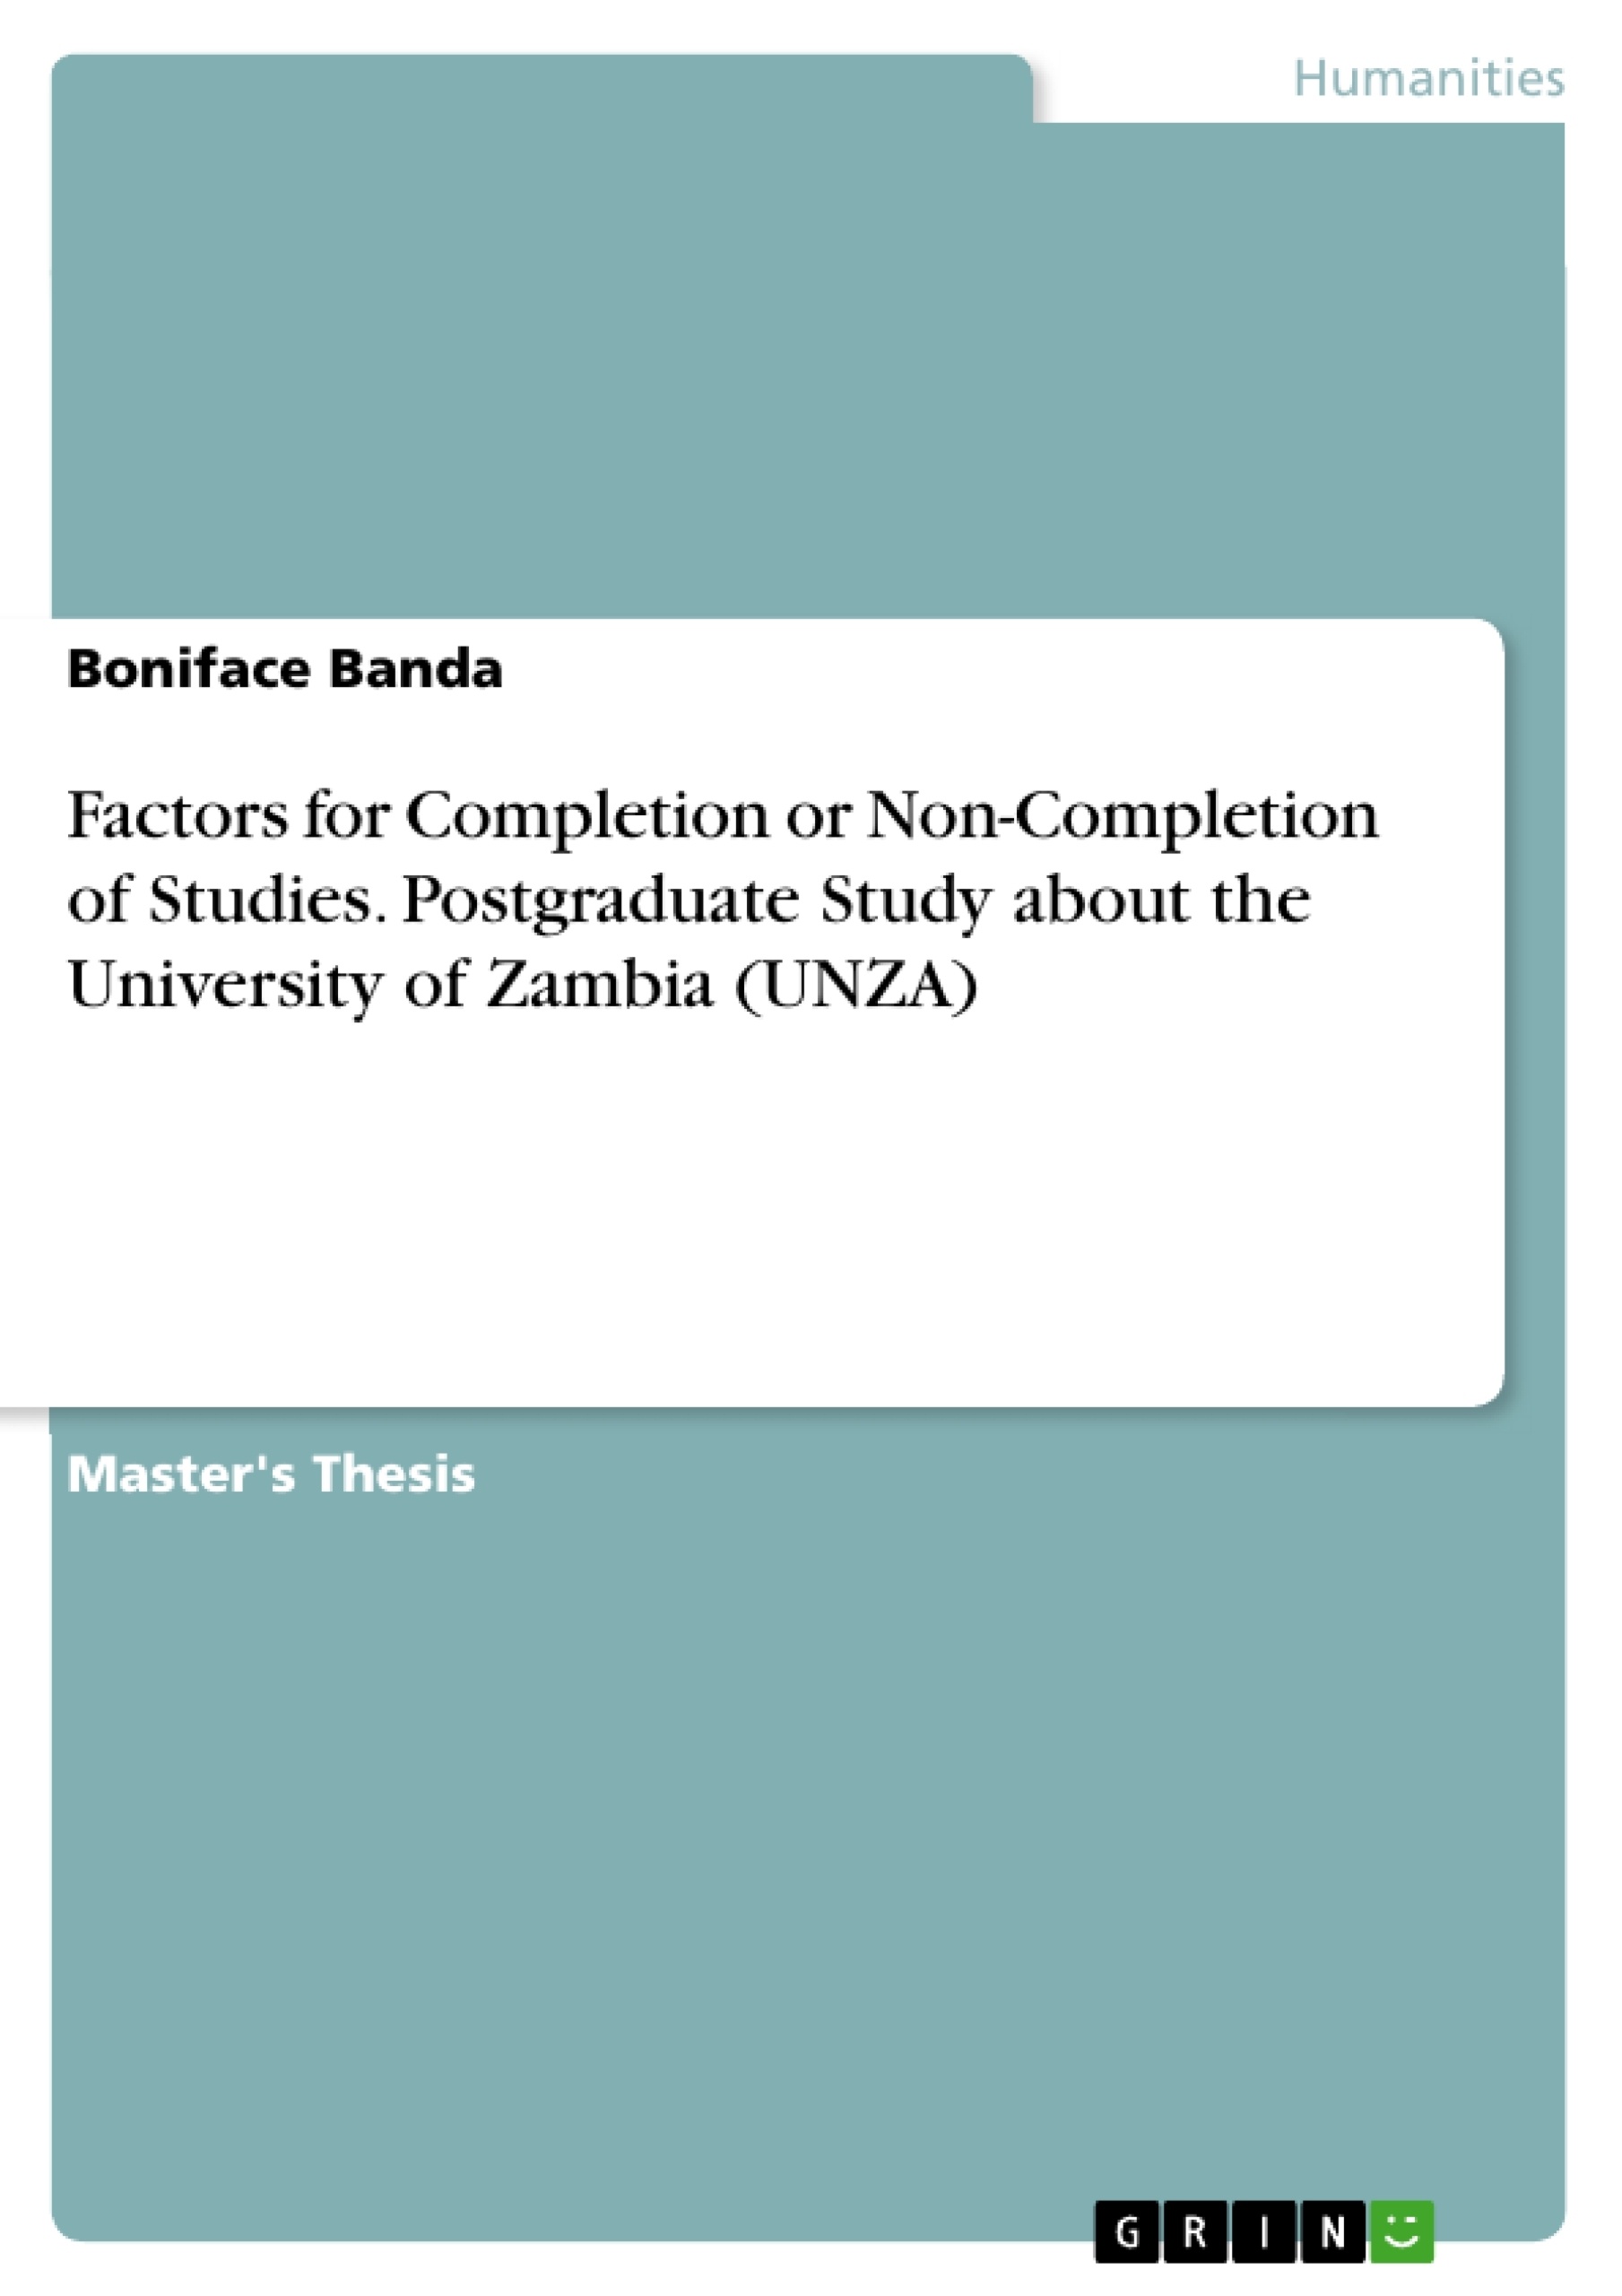 Title: Factors for Completion or Non-Completion of Studies. Postgraduate Study about the University of Zambia (UNZA)